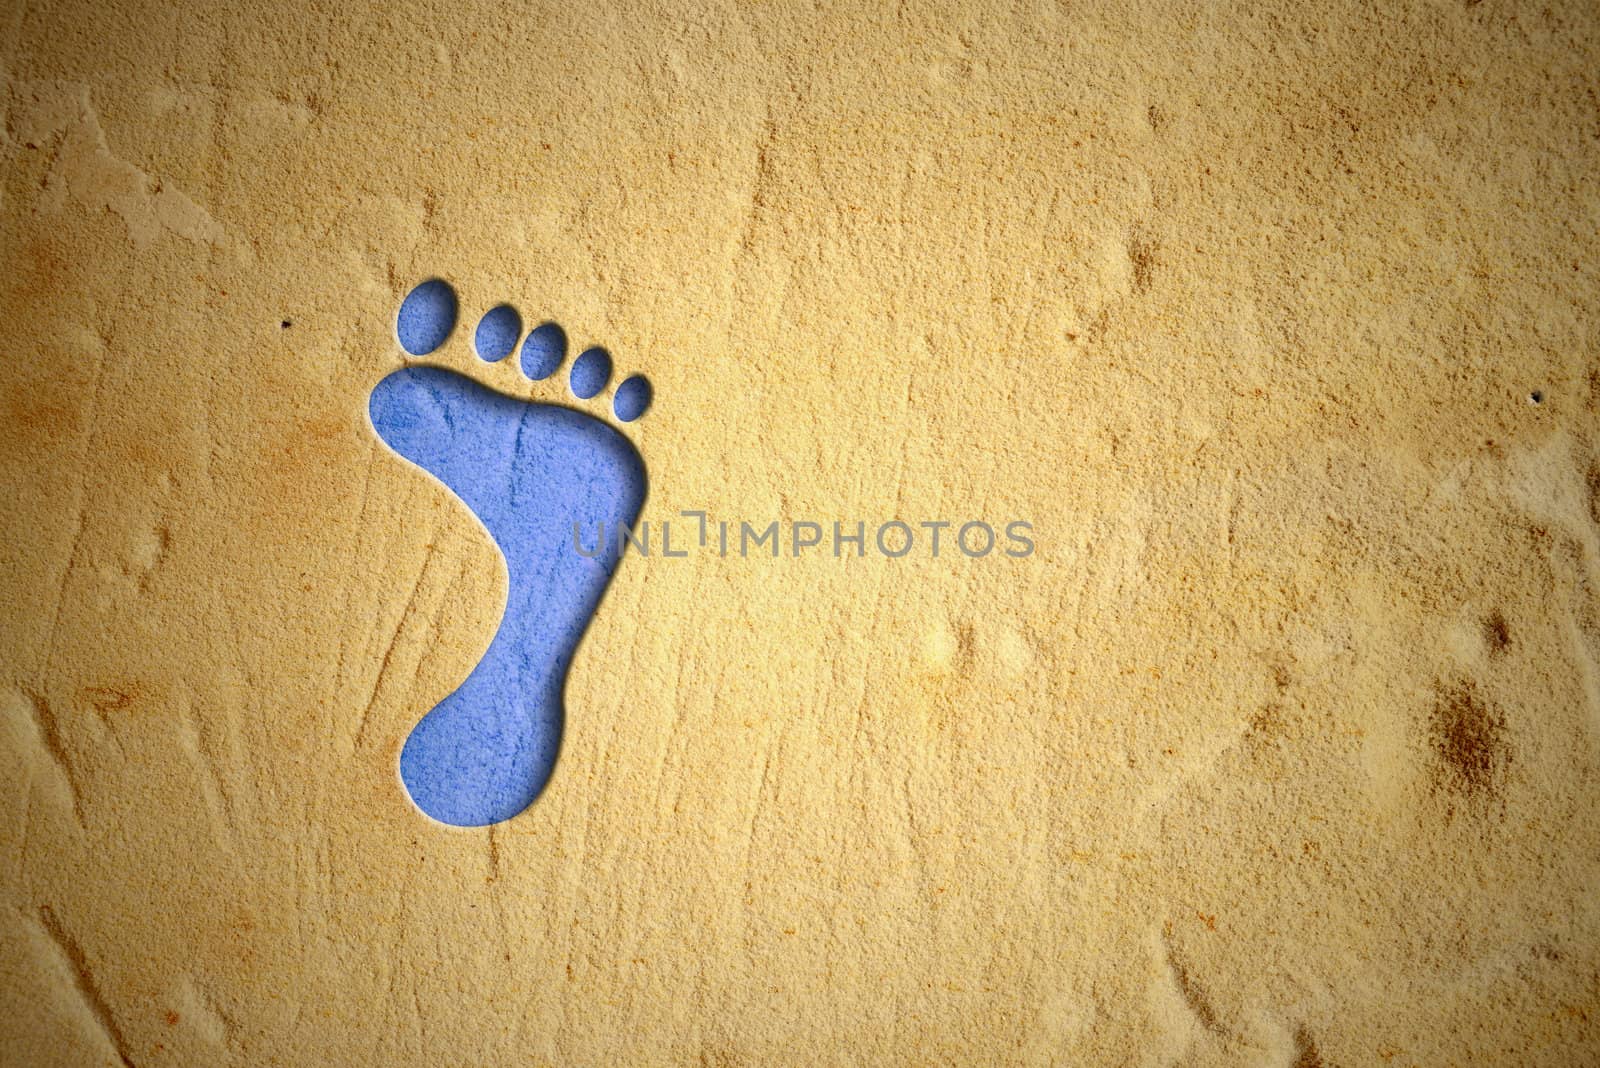 footprint drawing of blue sand, empty space for text